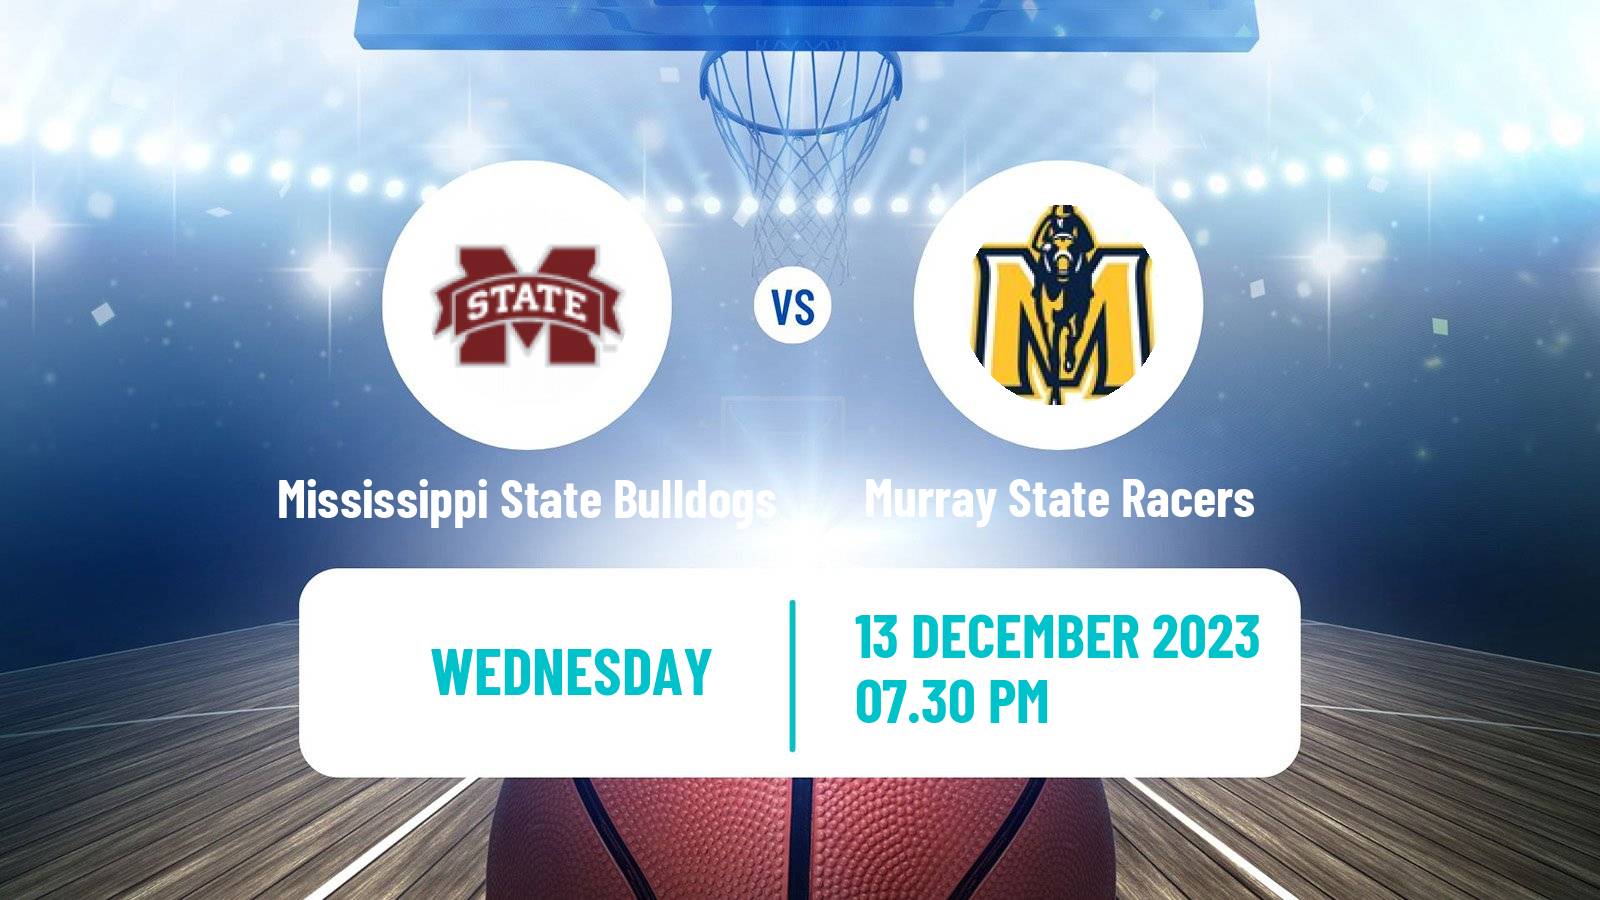 Basketball NCAA College Basketball Mississippi State Bulldogs - Murray State Racers